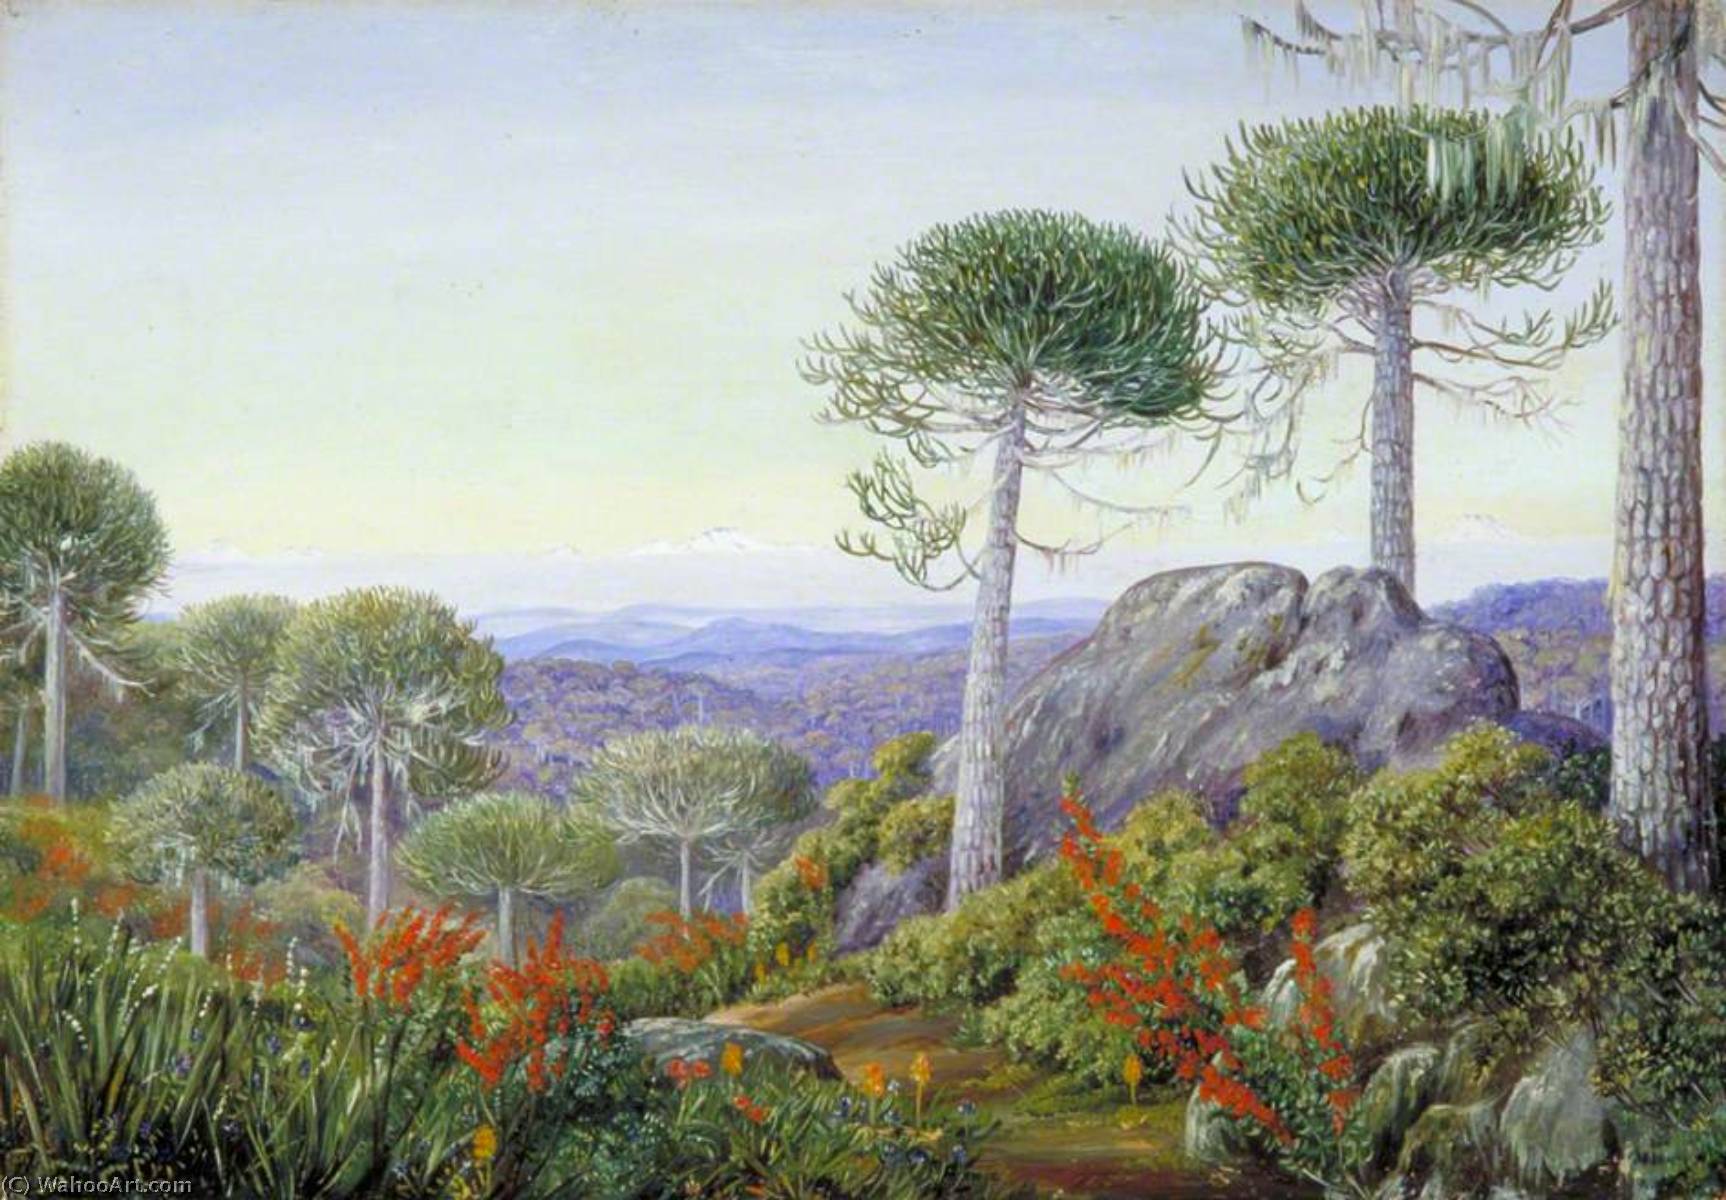 WikiOO.org - 백과 사전 - 회화, 삽화 Marianne North - Seven Snowy Peaks Seen from the Araucaria Forest, Chili